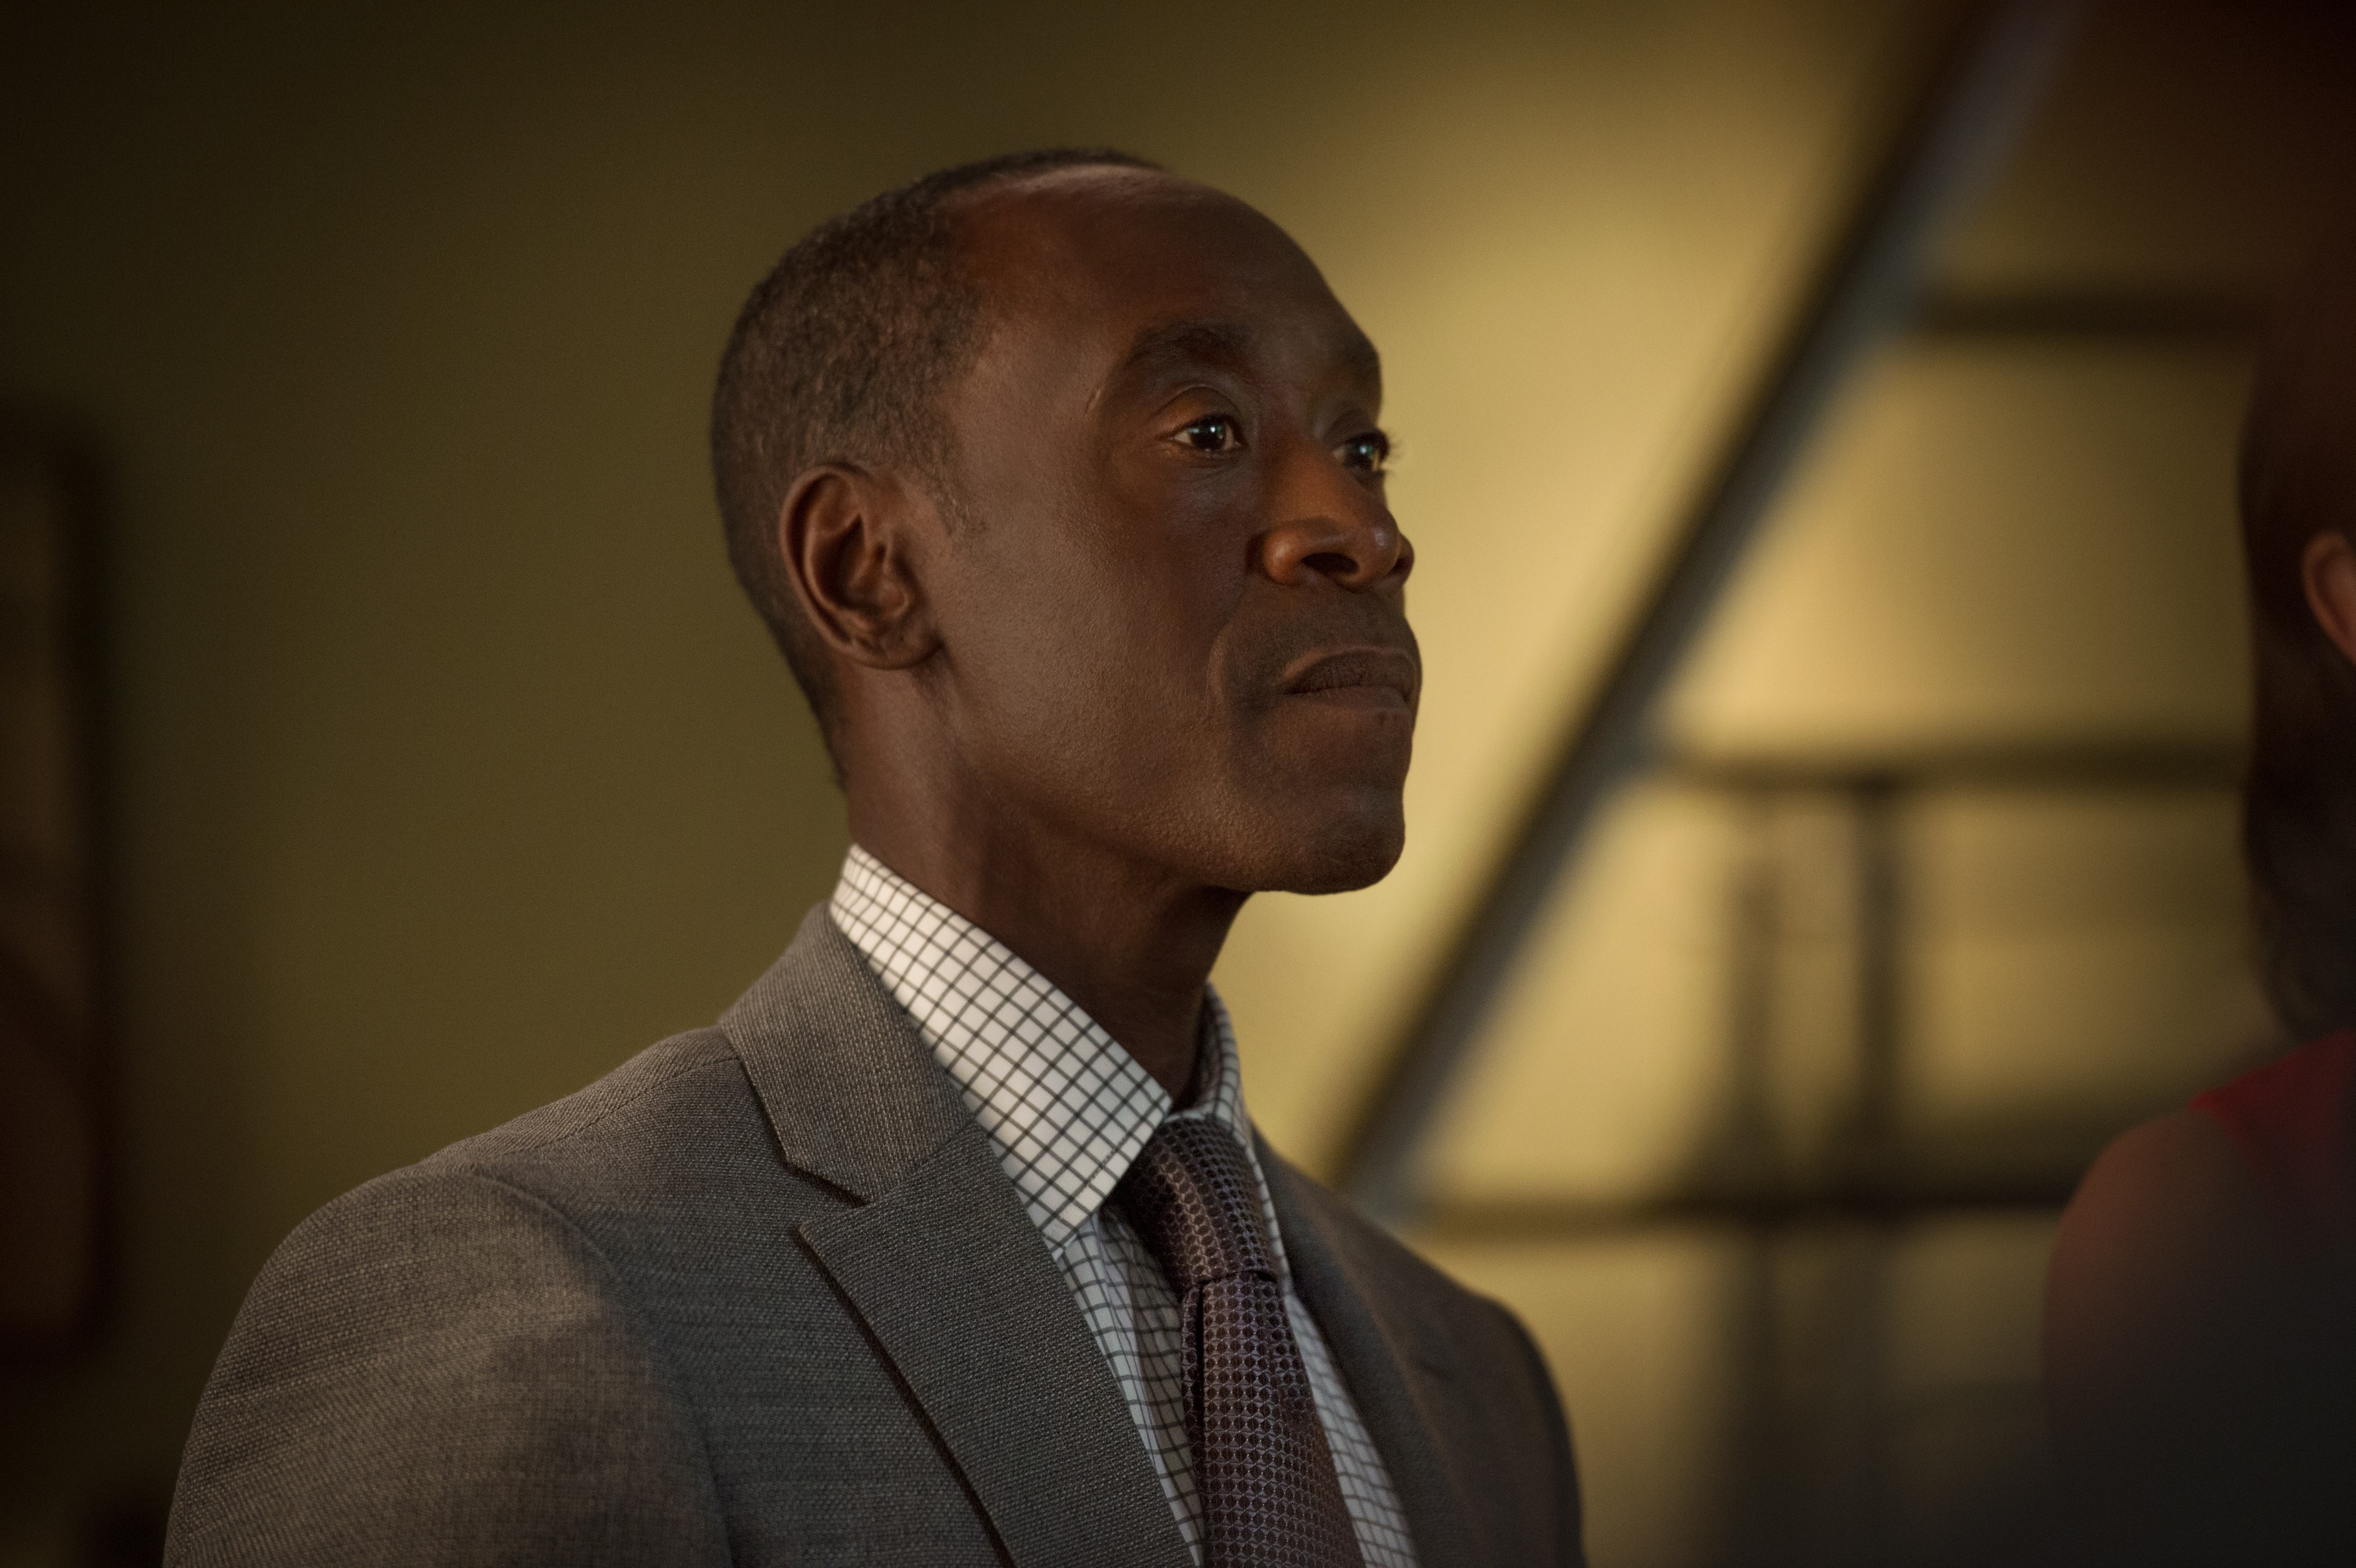 People 4928x3280 Avengers: Age of Ultron The Avengers Don Cheadle Iron Patriot movies Marvel Cinematic Universe men